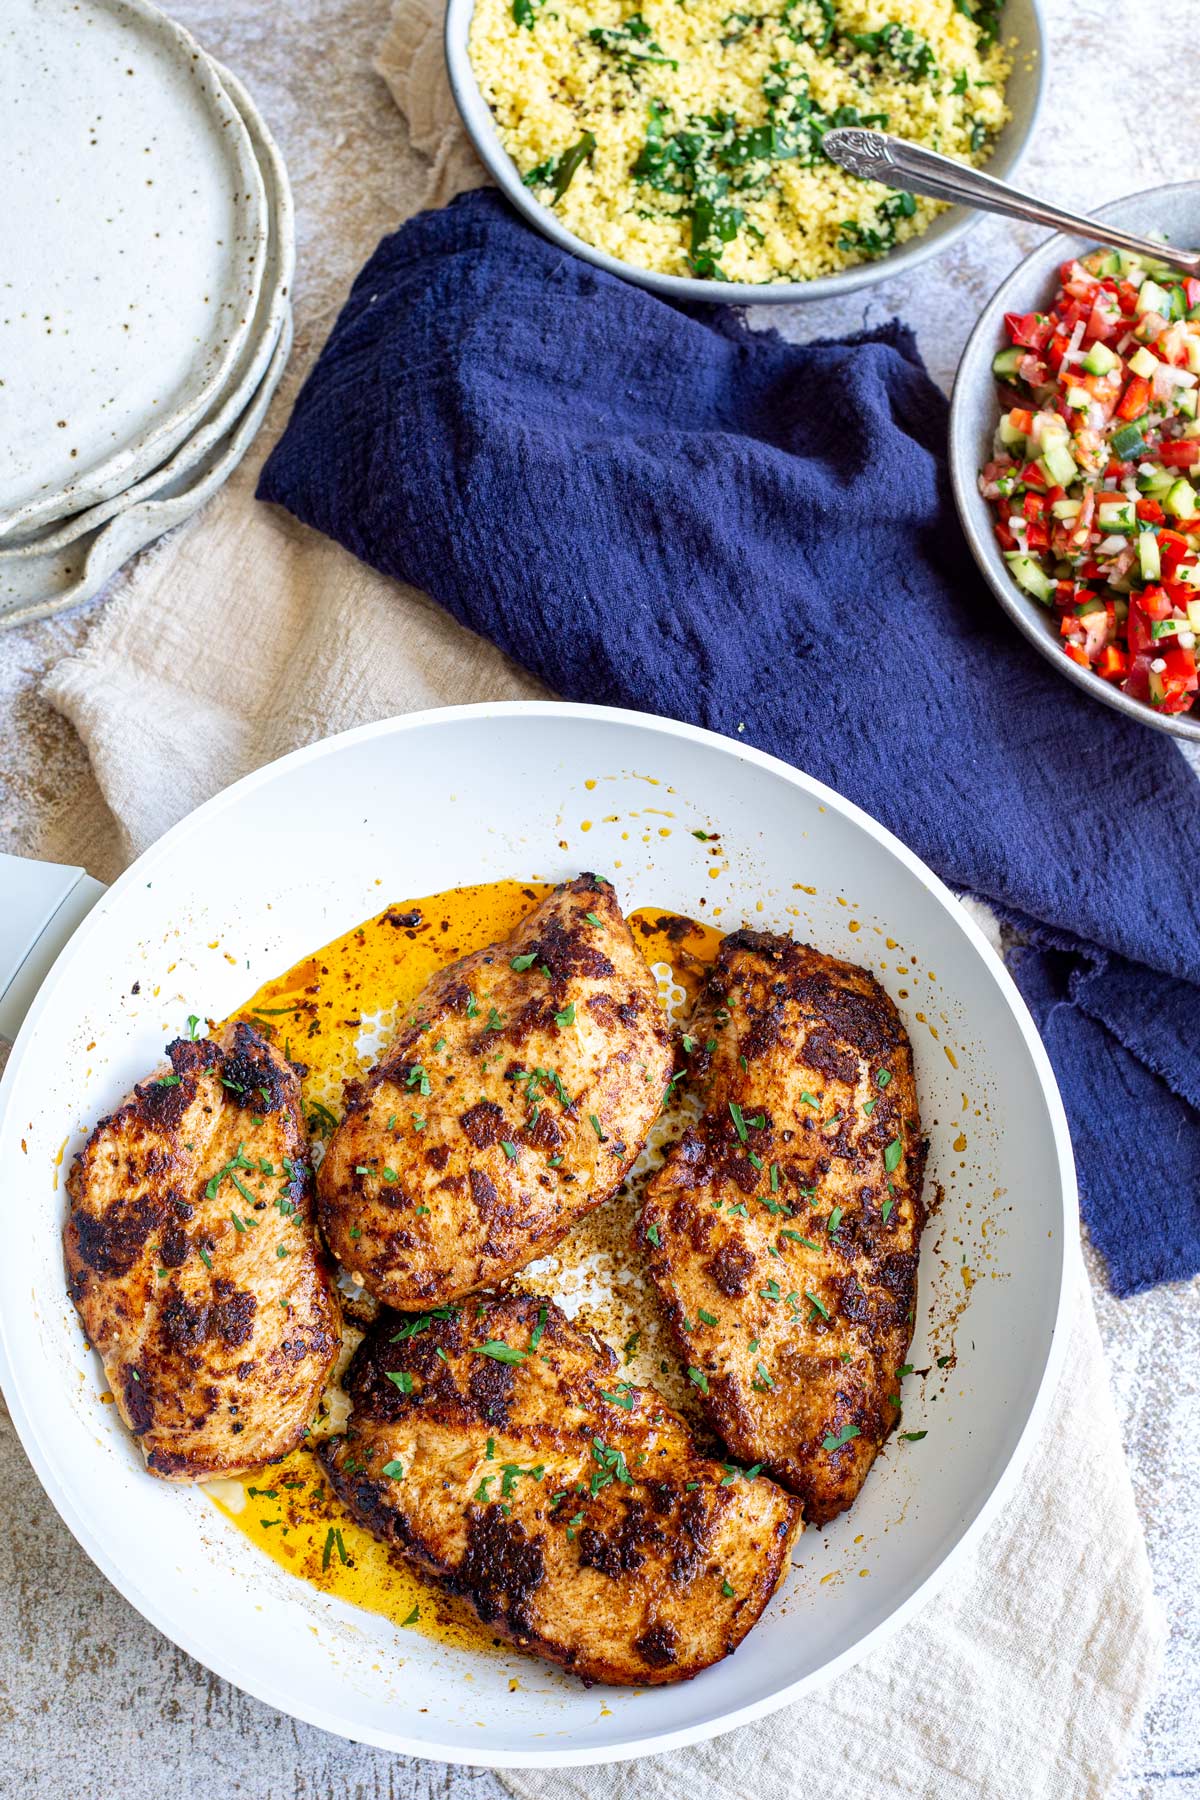 skillet with 4 chicken breasts, a bowl of tomato salad and a bowl of couscous on a table